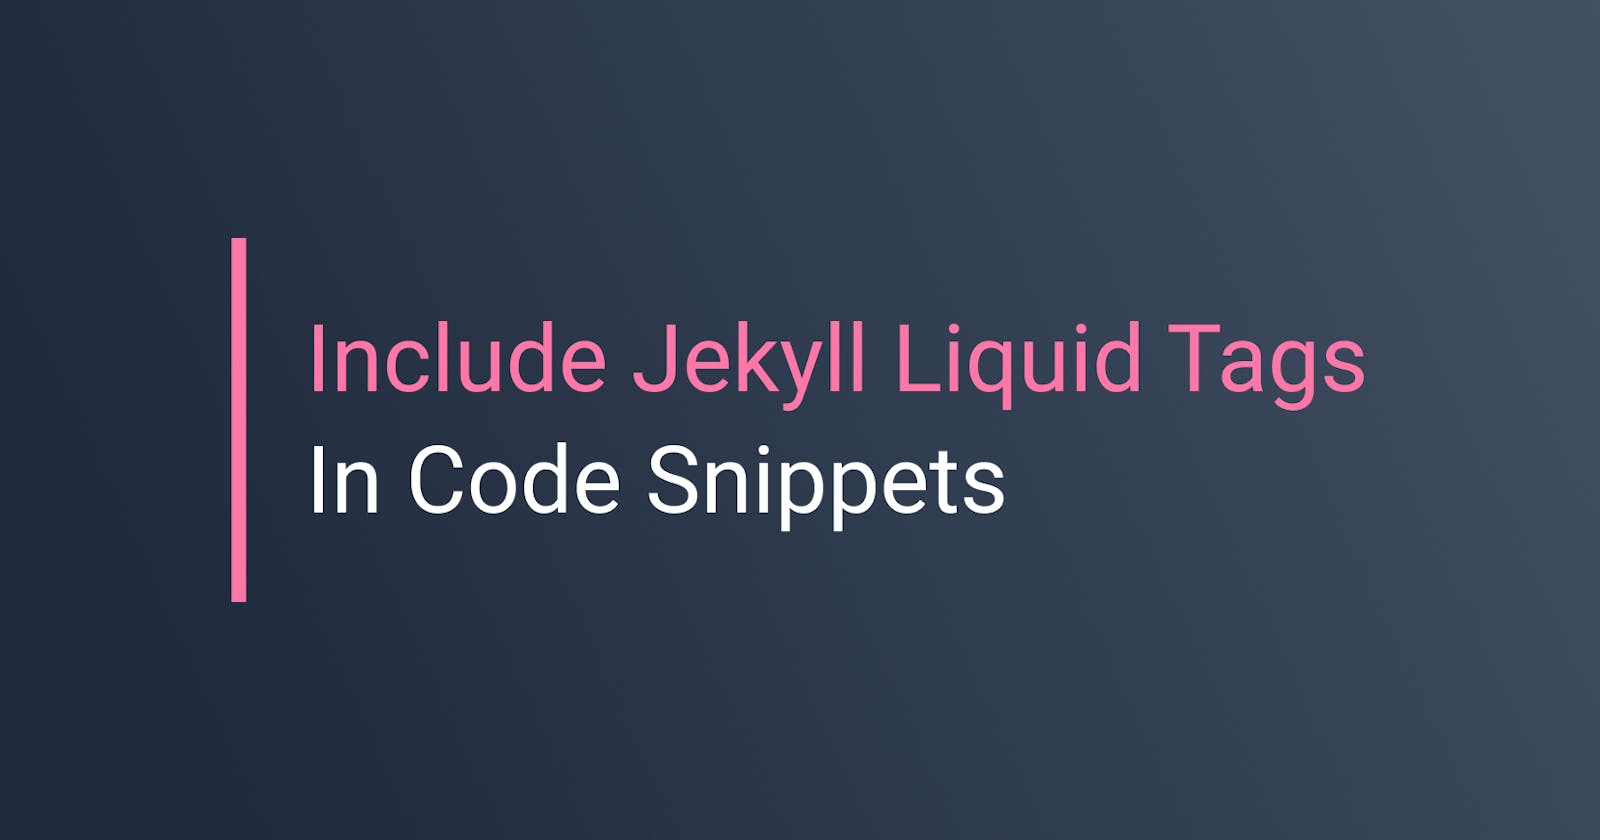 How To Include Jekyll Liquid Tags in Code Snippets